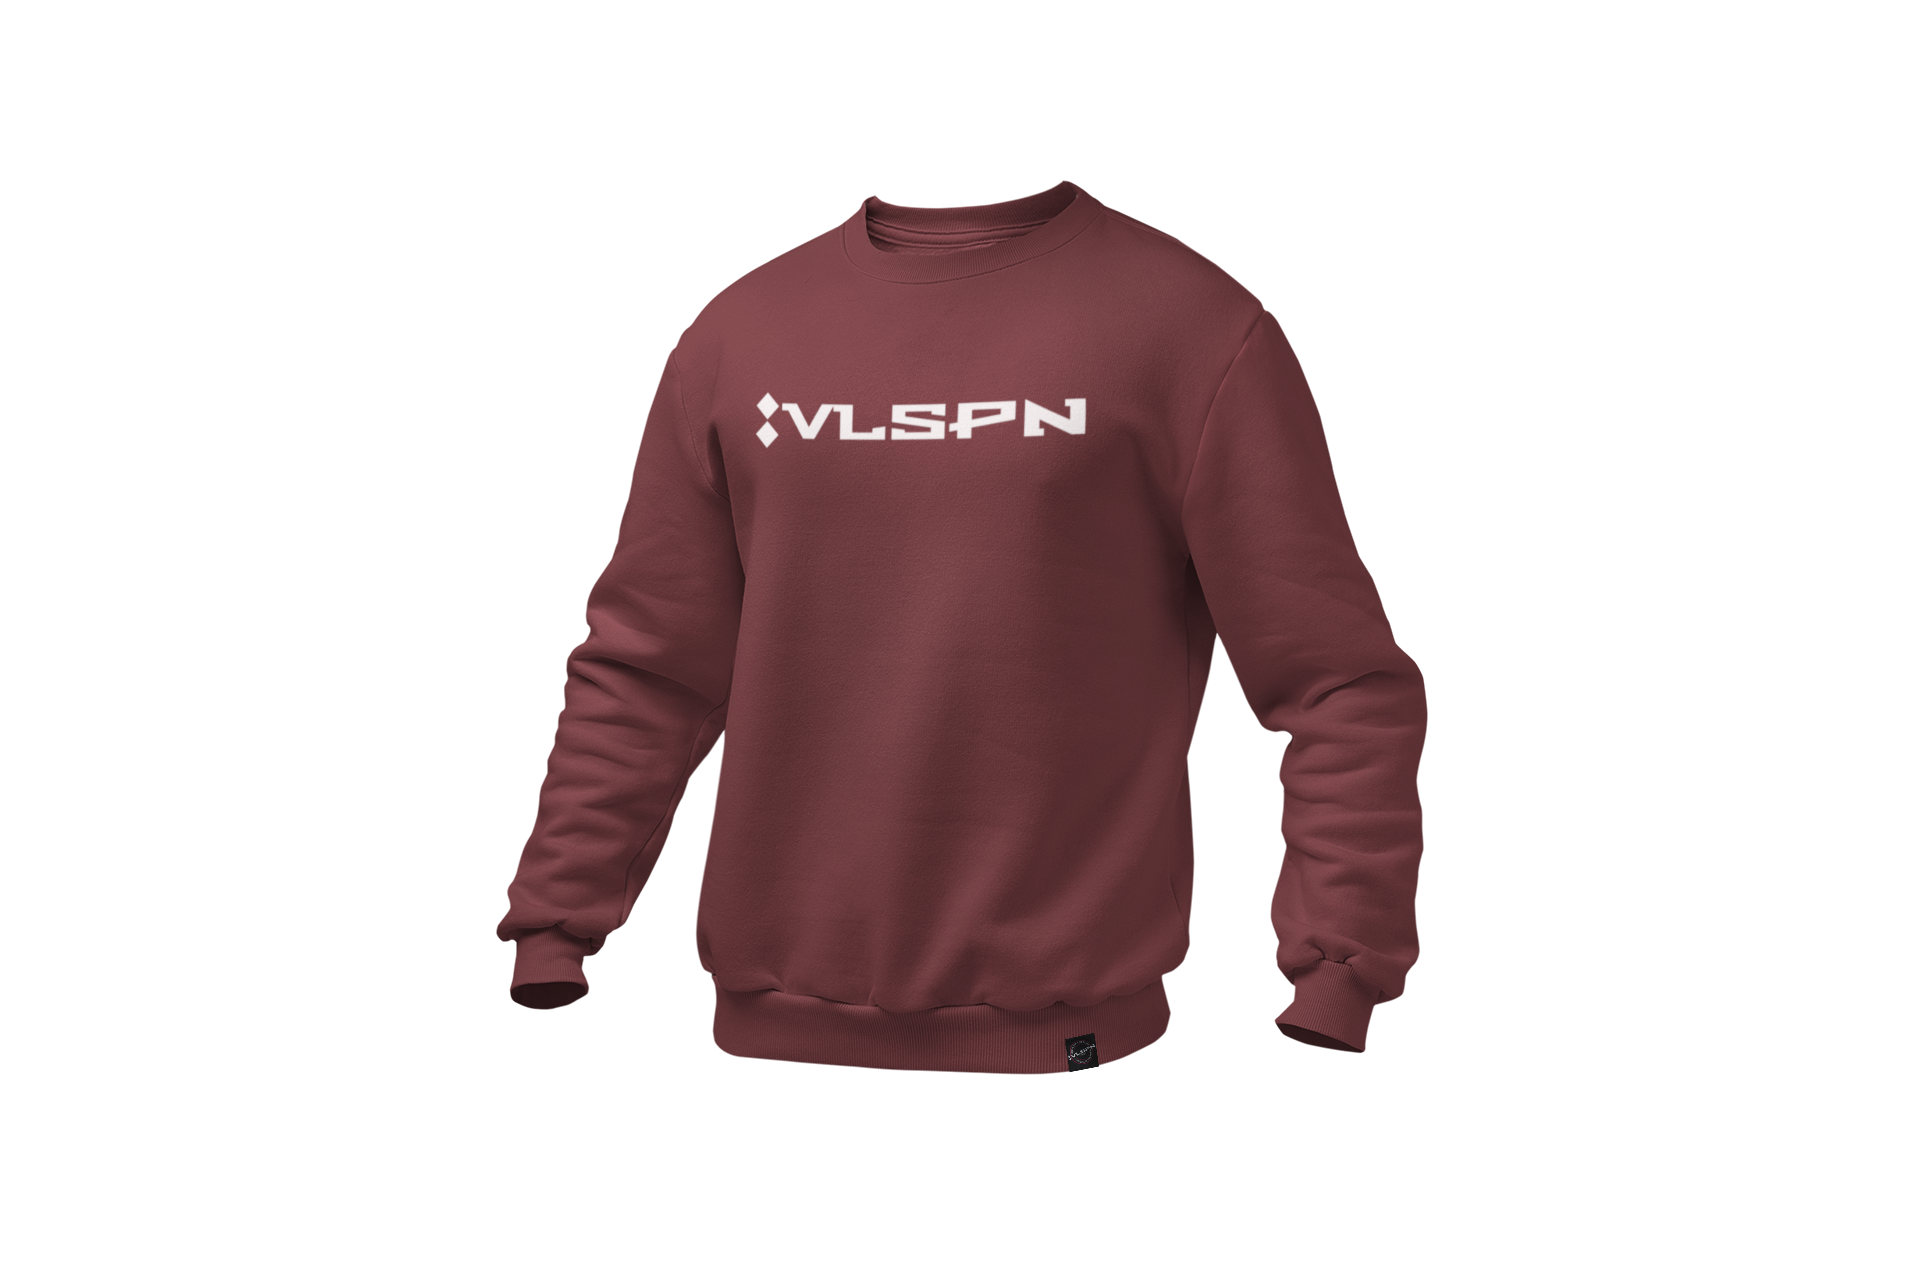 mockup-of-a-ghosted-crewneck-sweatshirt-over-a-solid-background-26960 (99).png